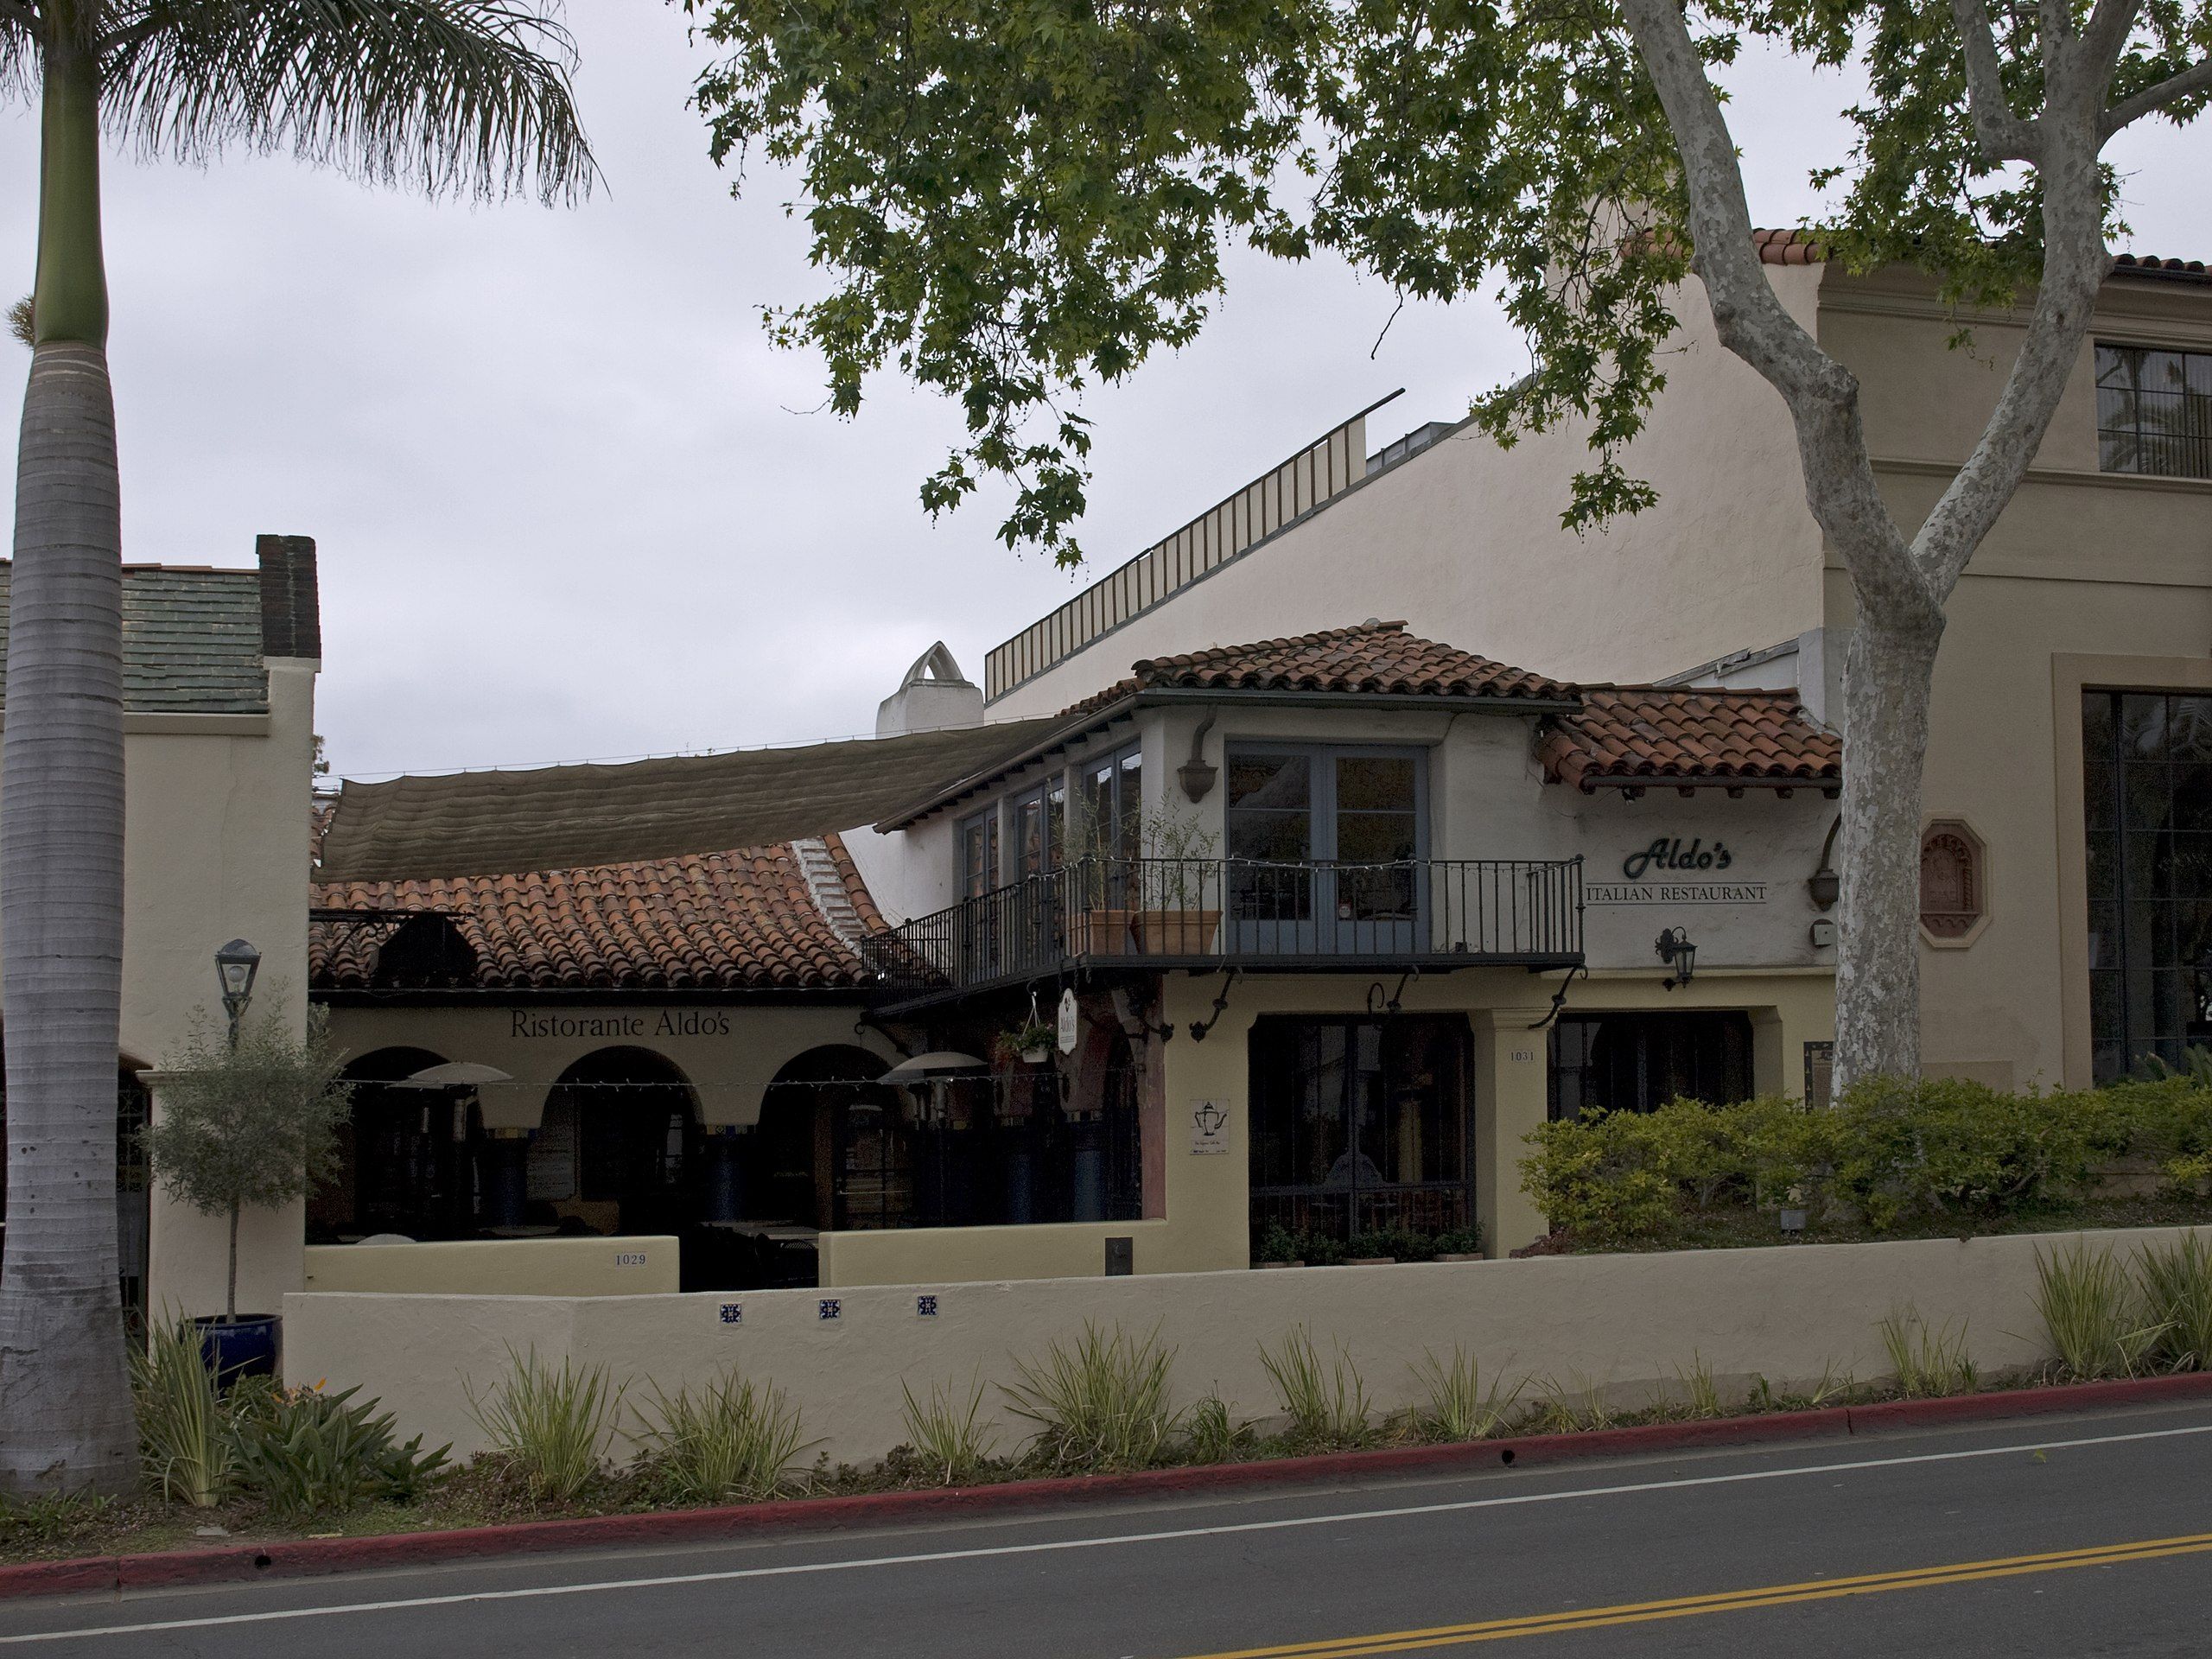 A street view of a historic Spanish Colonial style building in Santa Barbara.